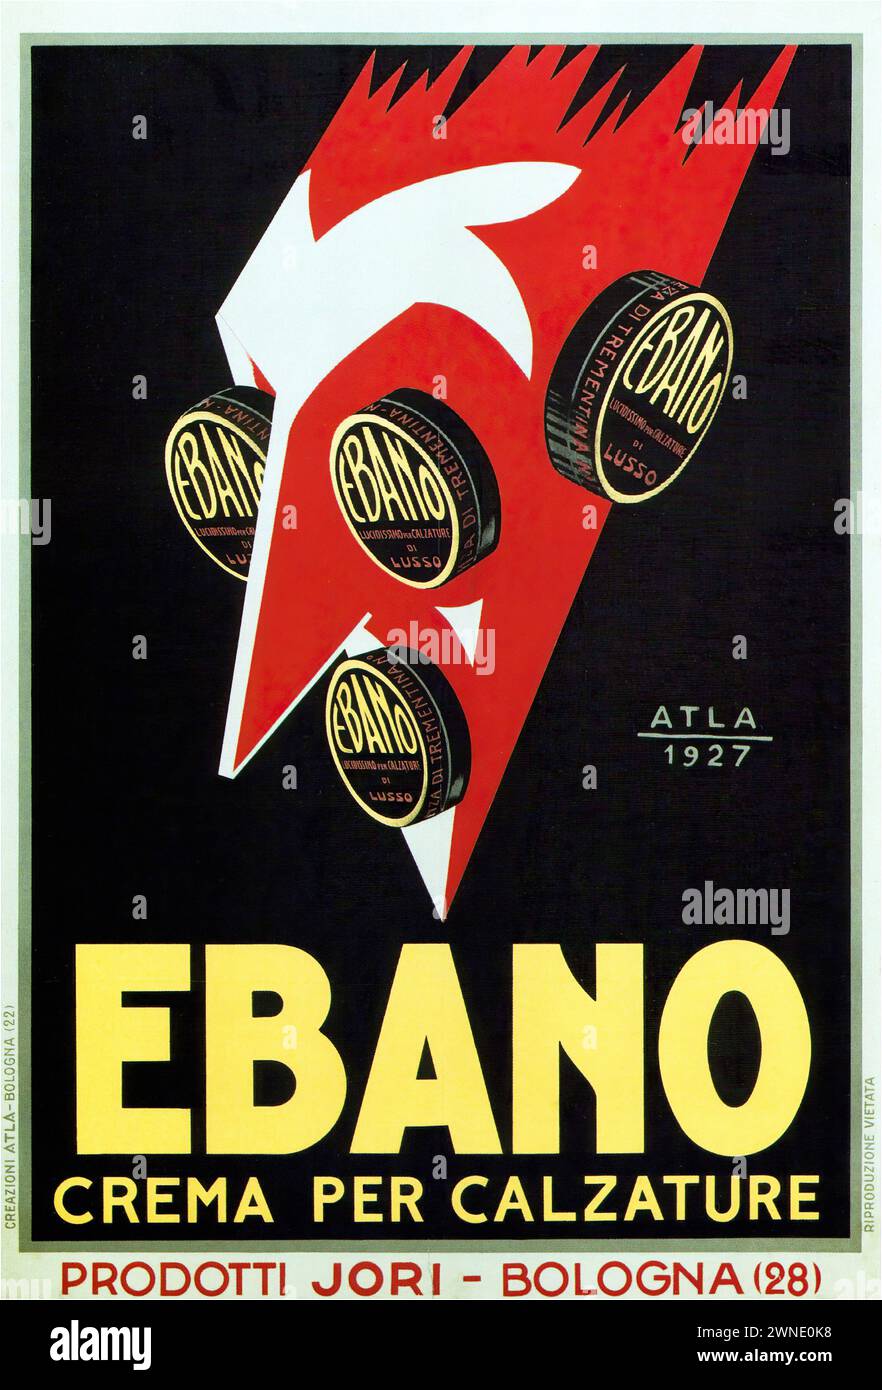 'EBANO CREMA PER CALZATURE PRODOTTI JORI - BOLOGNA (28)' ['EBANO SHOE CREAM PRODUCTS JORI - BOLOGNA (28)'] Vintage Italian Advertising displaying a red and white shoe polish container with a lightning bolt design, suggestive of speed and efficiency. The graphic style is indicative of the Art Deco movement, popular in the 1920s. Stock Photo